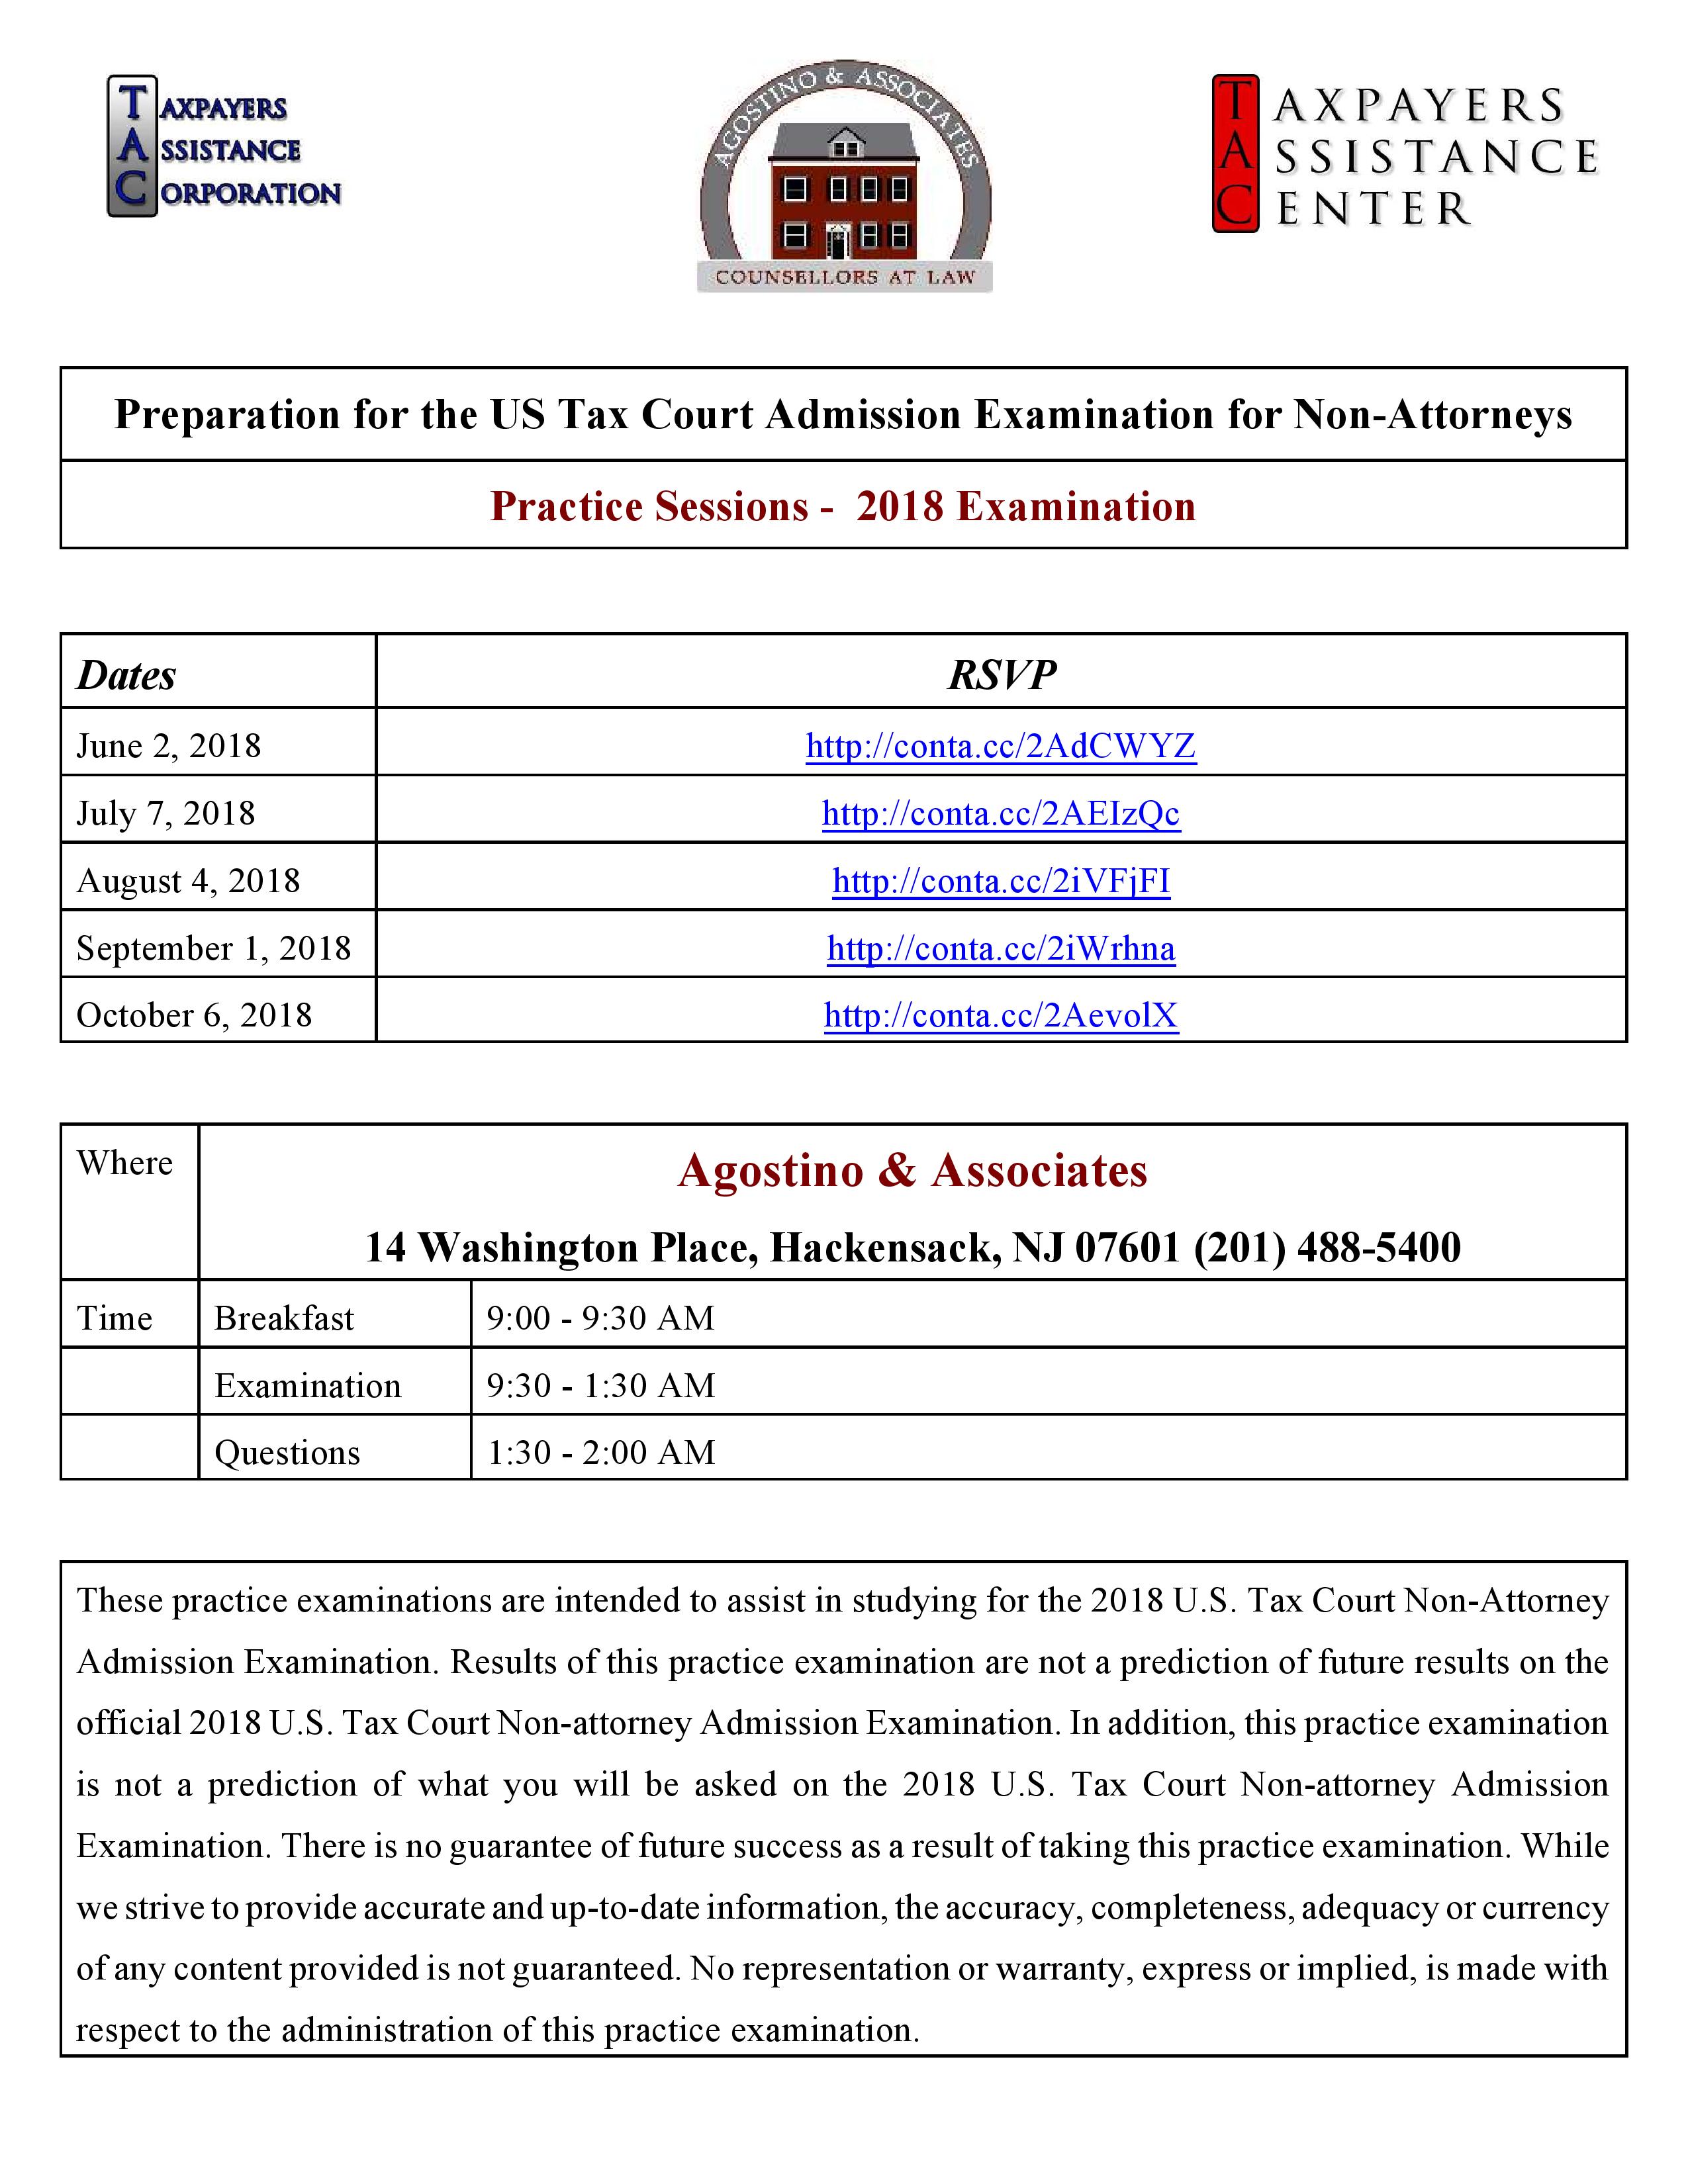 Preparation for the US Tax Court Admission Exam Practice Exam 9/1